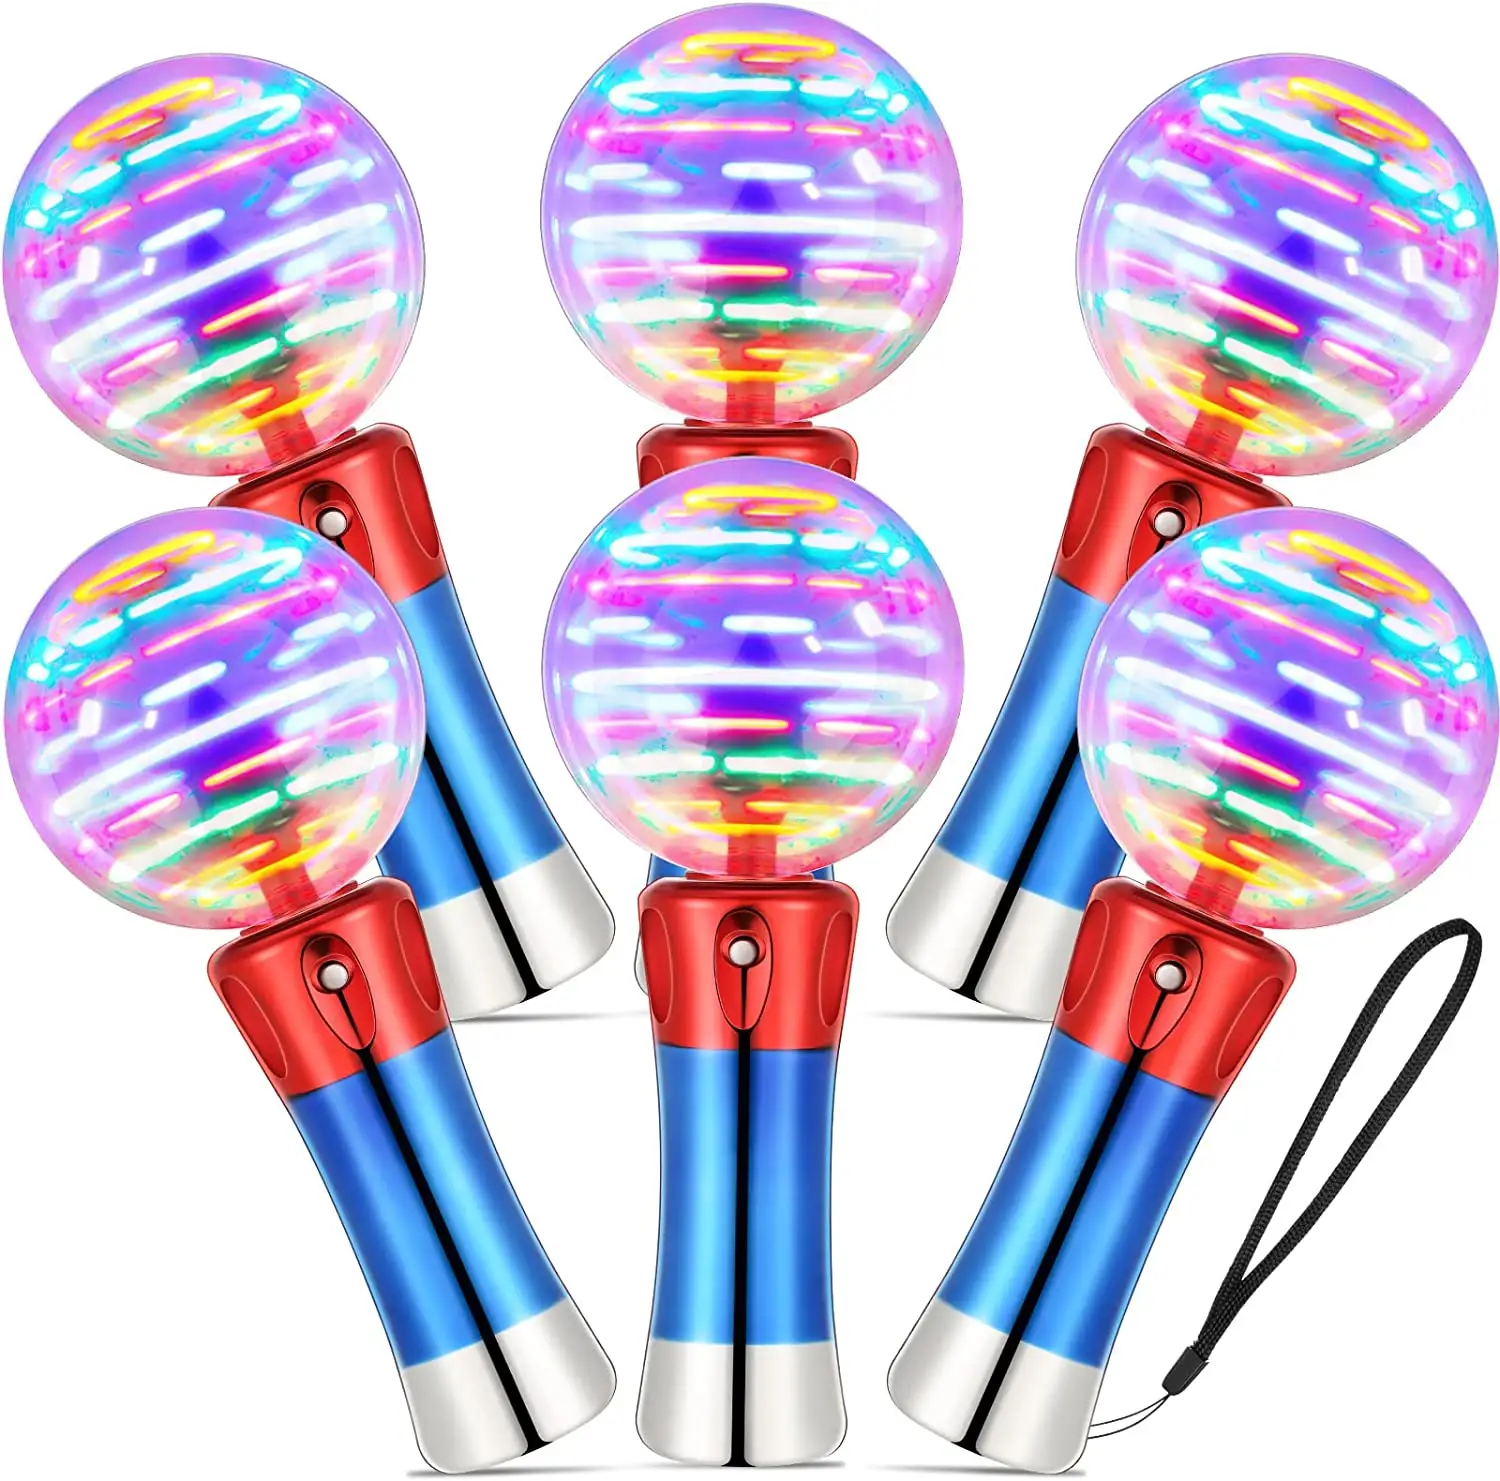 FT vendita calda Spinning Ball Magic Stick Spin Toy Light Up Toys Led lampeggiante Light Up Magic Spinning Colorful Ball